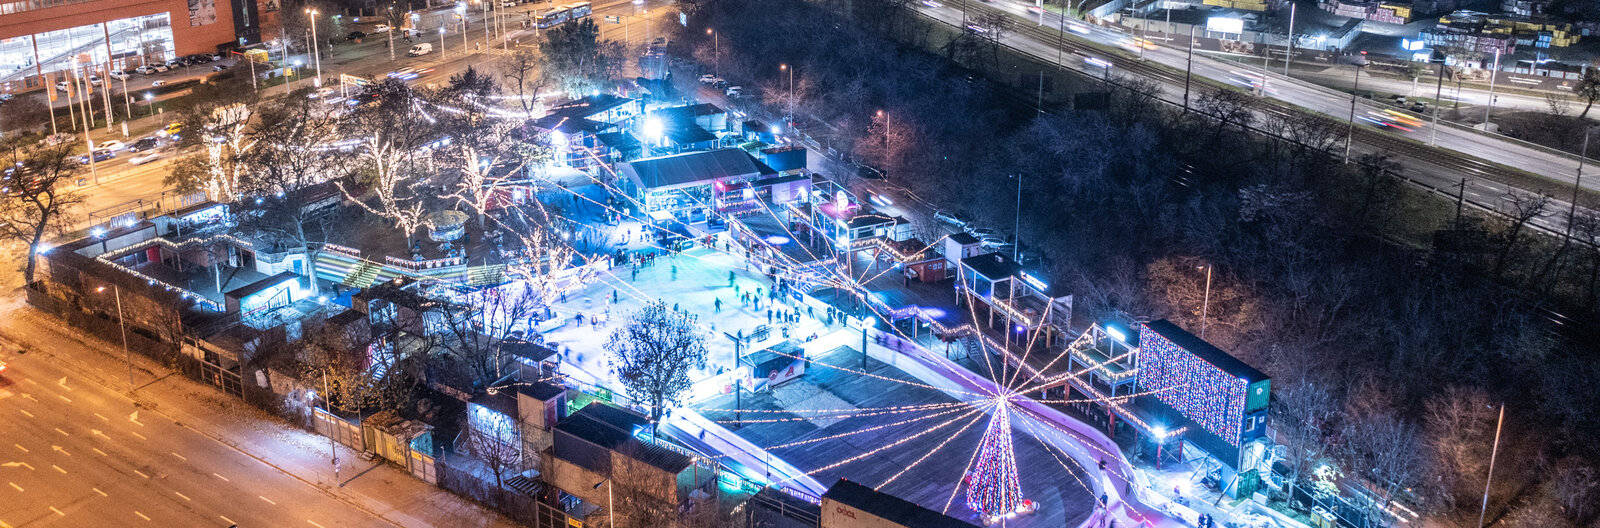 Winter delights – 7 best ice rinks in Budapest for fun and frolic